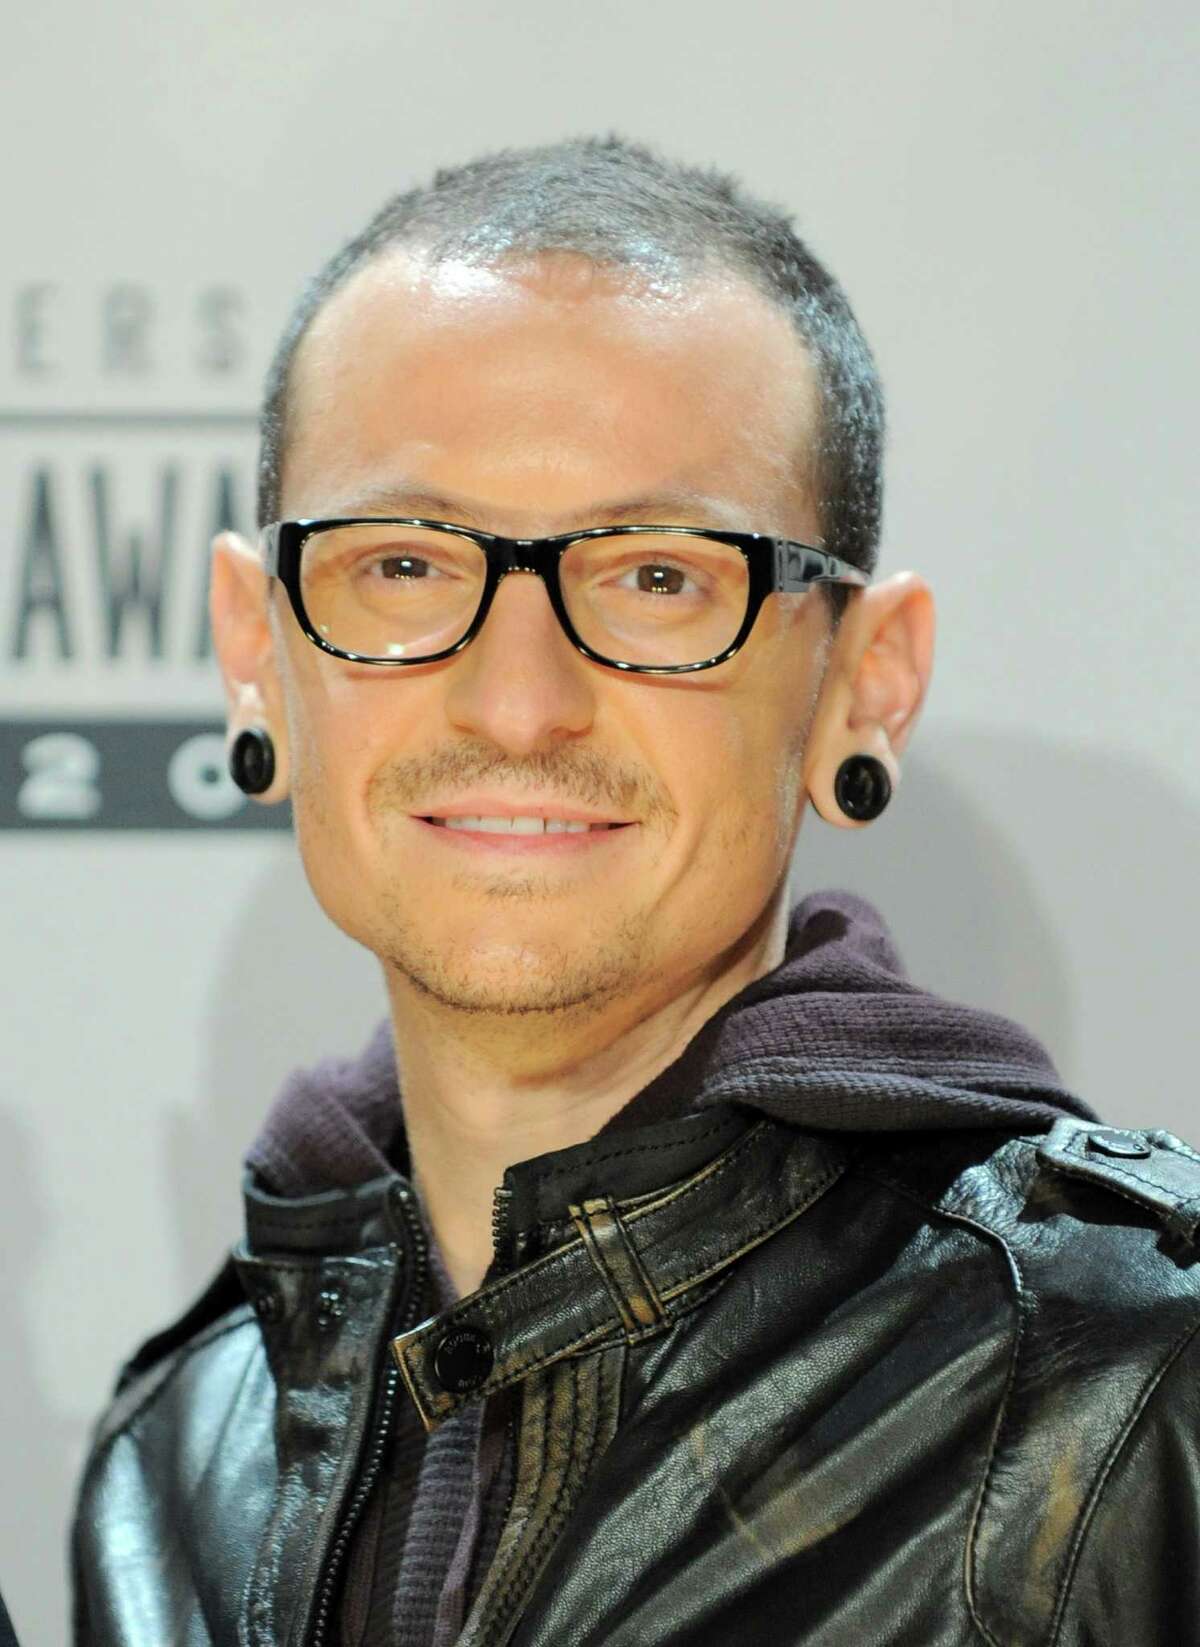 Chester Bennington, of musical group Linkin Park and winner of the award for alternative rock favorite artist, poses backstage at the 40th Anniversary American Music Awards on Sunday, Nov. 18, 2012, in Los Angeles. (Photo by Jordan Strauss/Invision/AP)